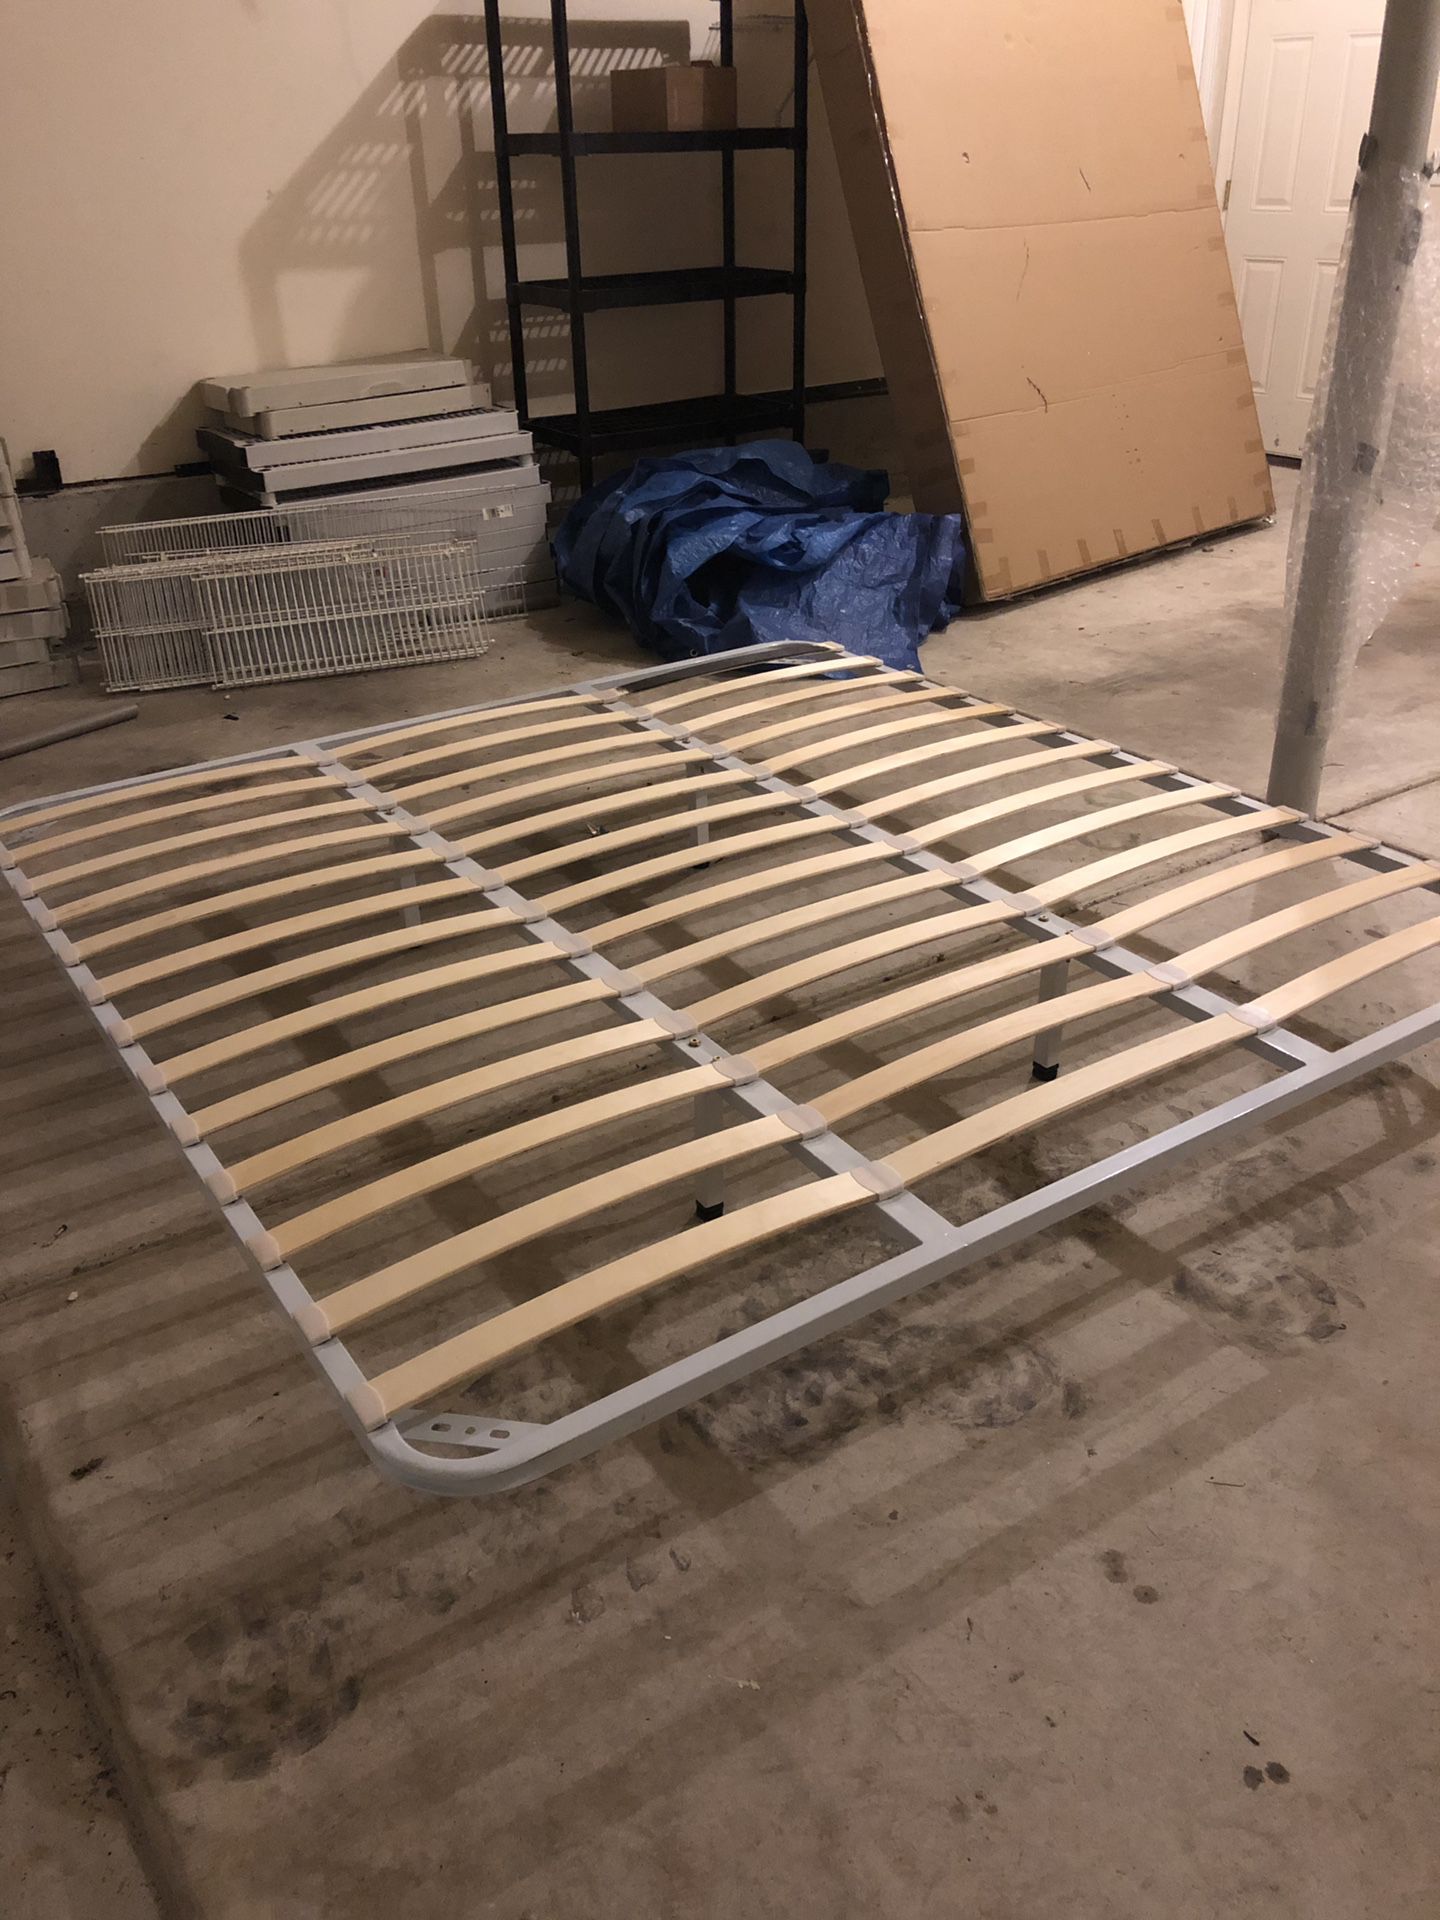 King Size bed frame- Brand New $80